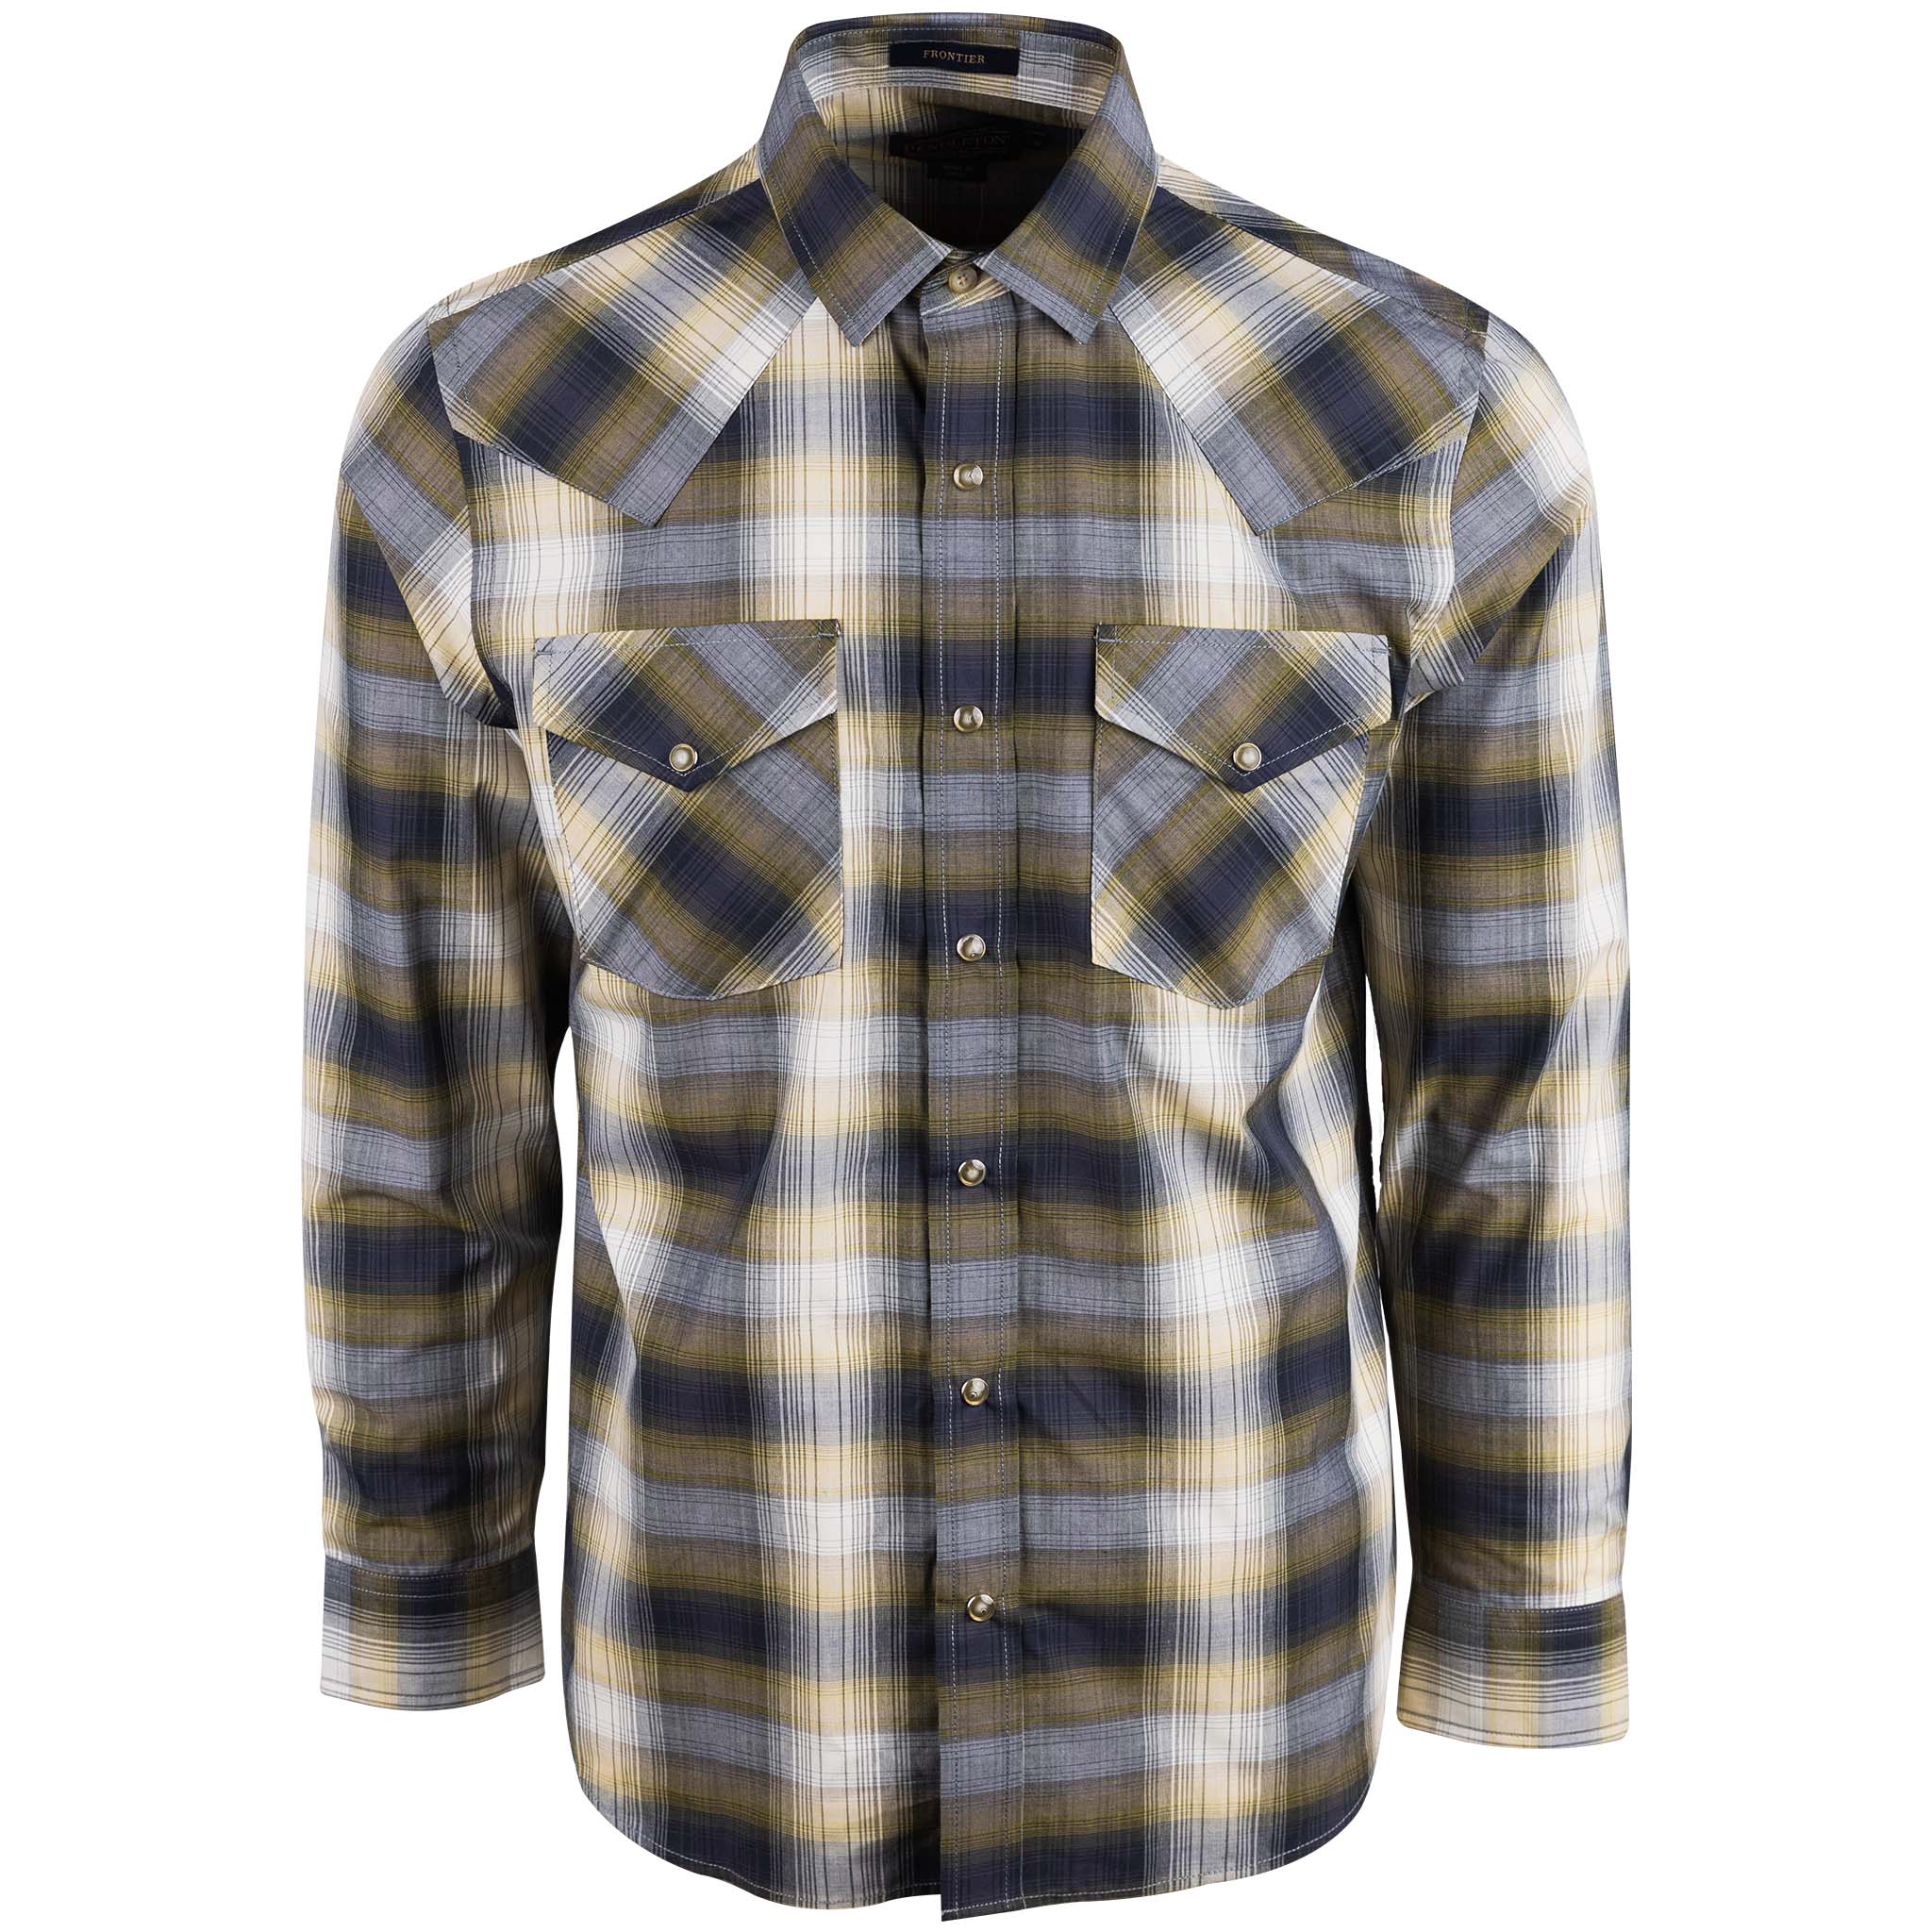 Frontier Shirt Ls Grey Navy Plaid 21 Front